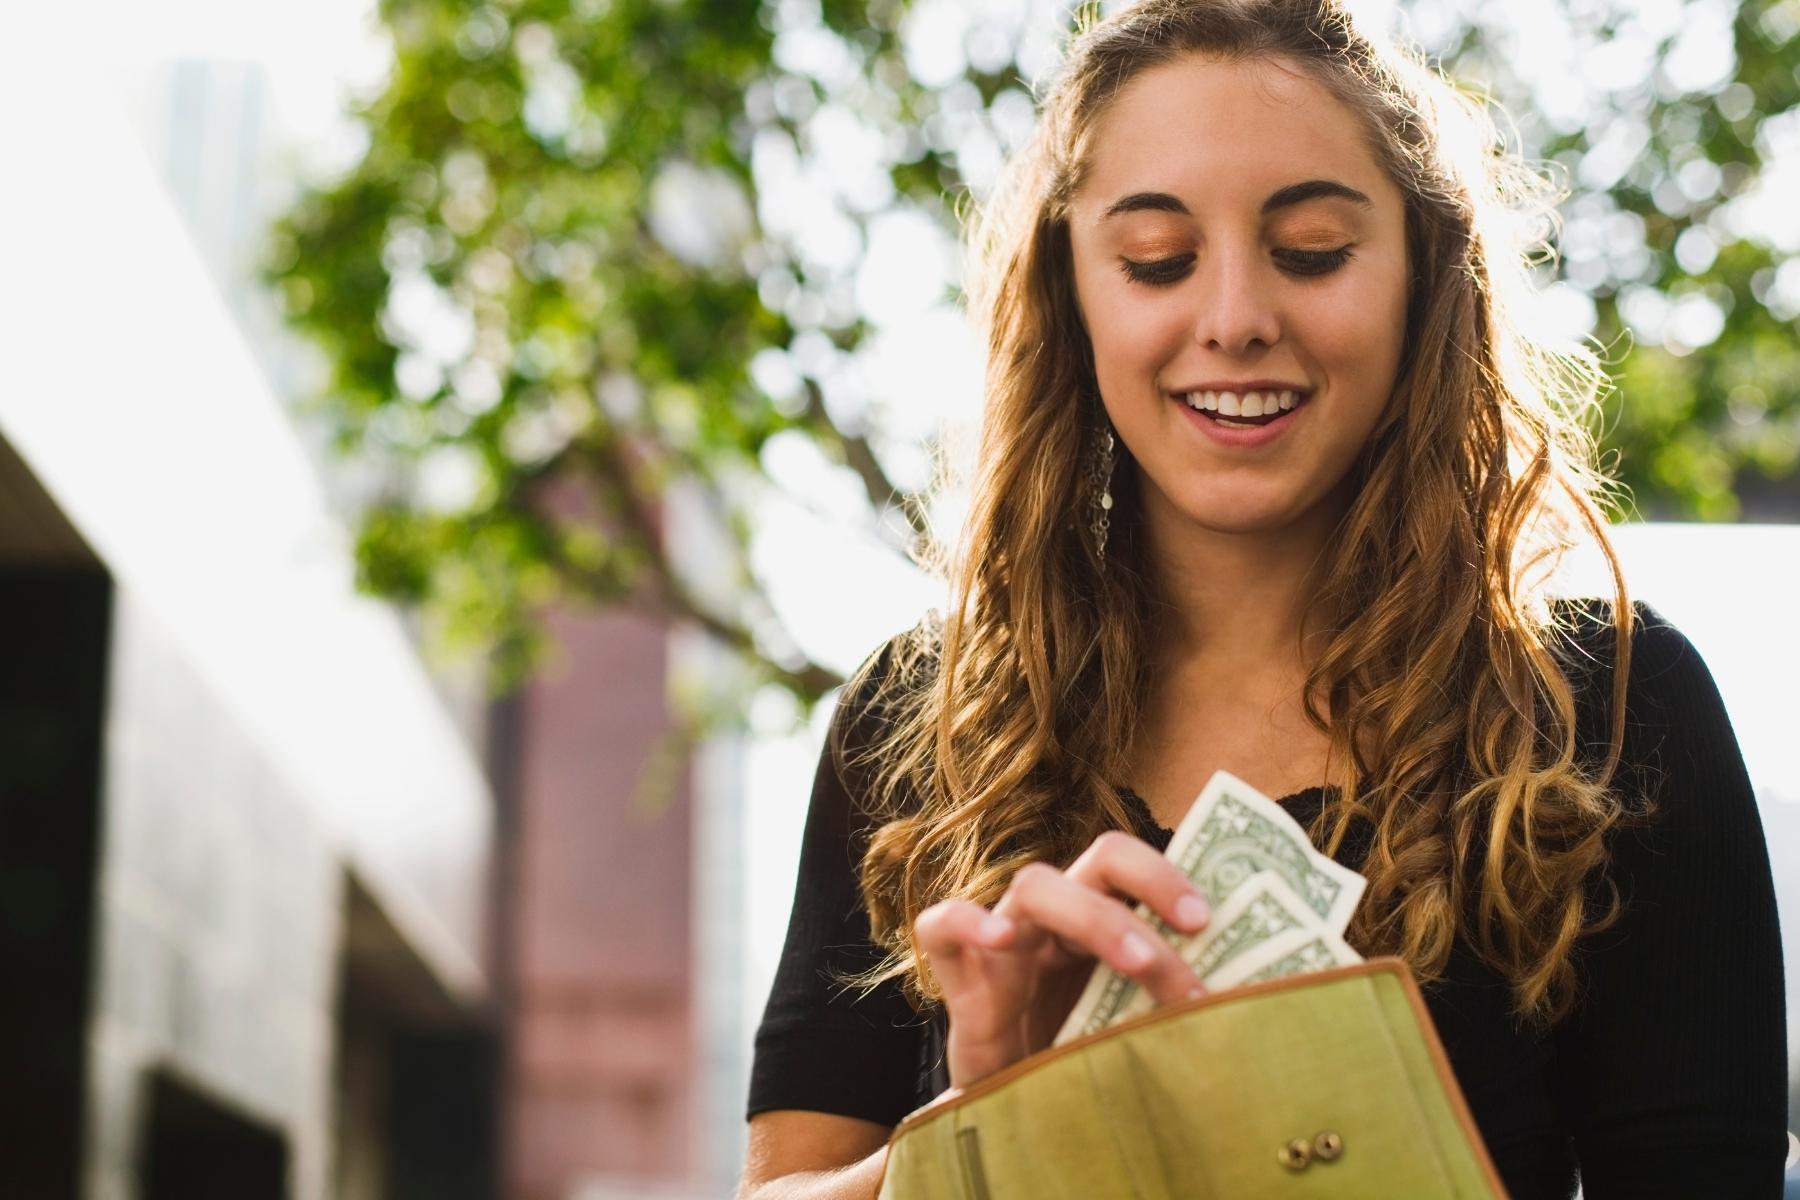 Young woman placing cash into her wallet